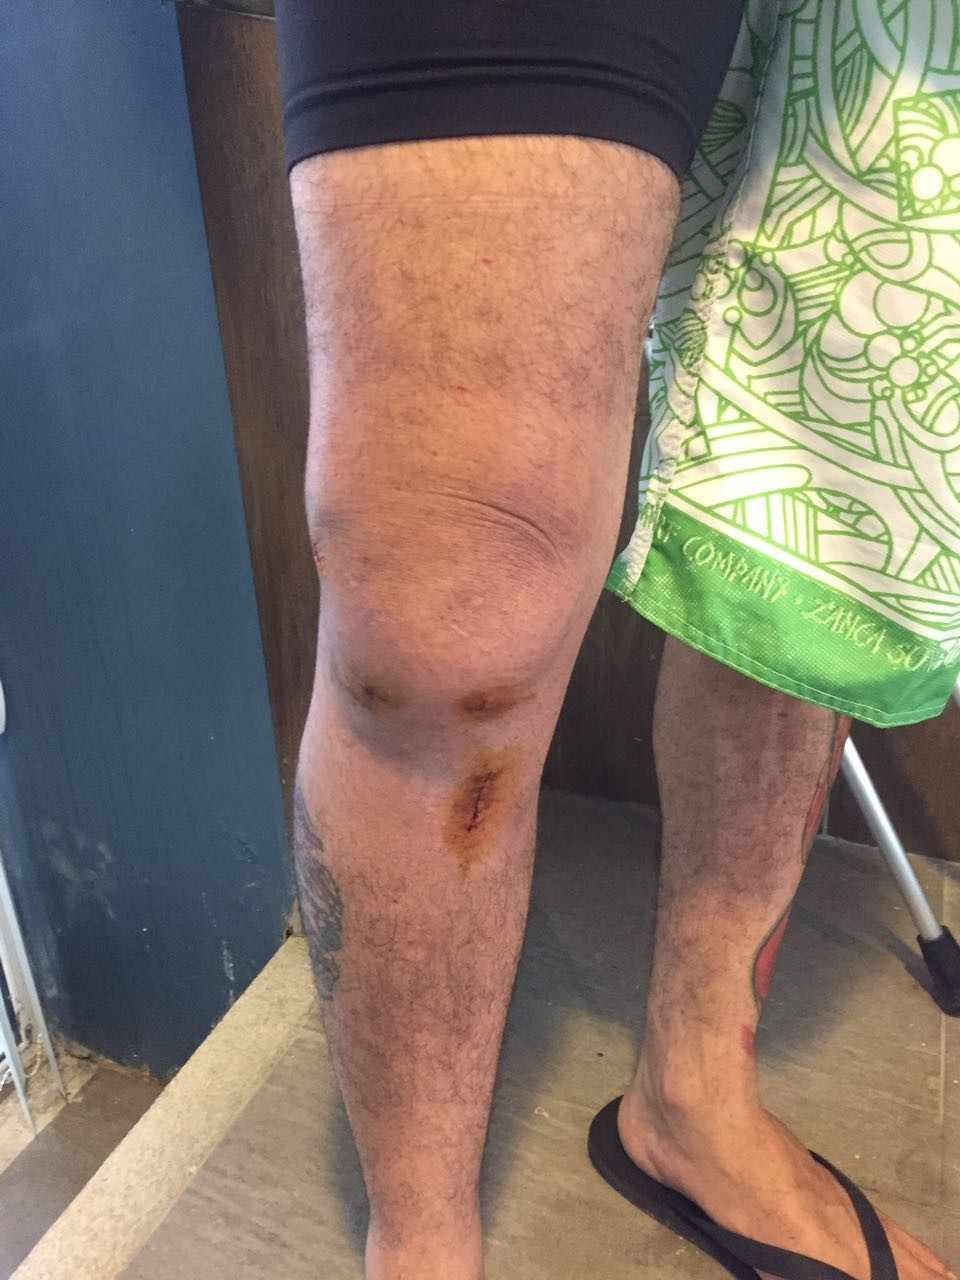 Figure 1: knee injury on the first day, evidencing the edema/research data.